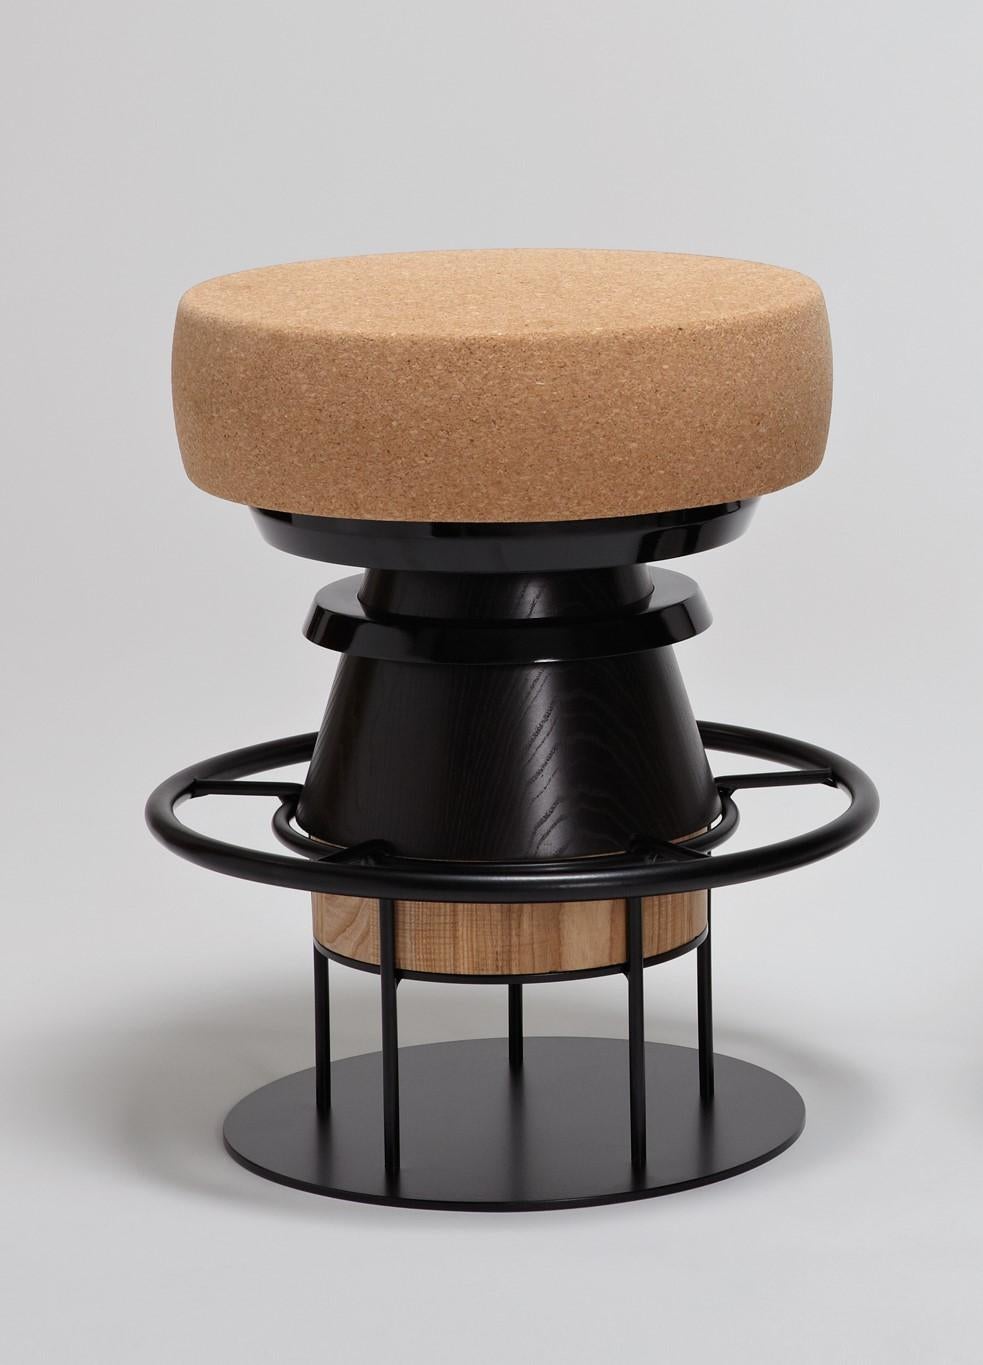 Set of 2 Low Black Tembo stool, note design studio
Dimensions: D 36 x H 46 cm
Materials: Lacquered steel structure, solid wood (beech) and lacquered MDF, natural cork base.
Available in colorful version and in 3 sizes: H46, H64, H76 cm.

Tembo